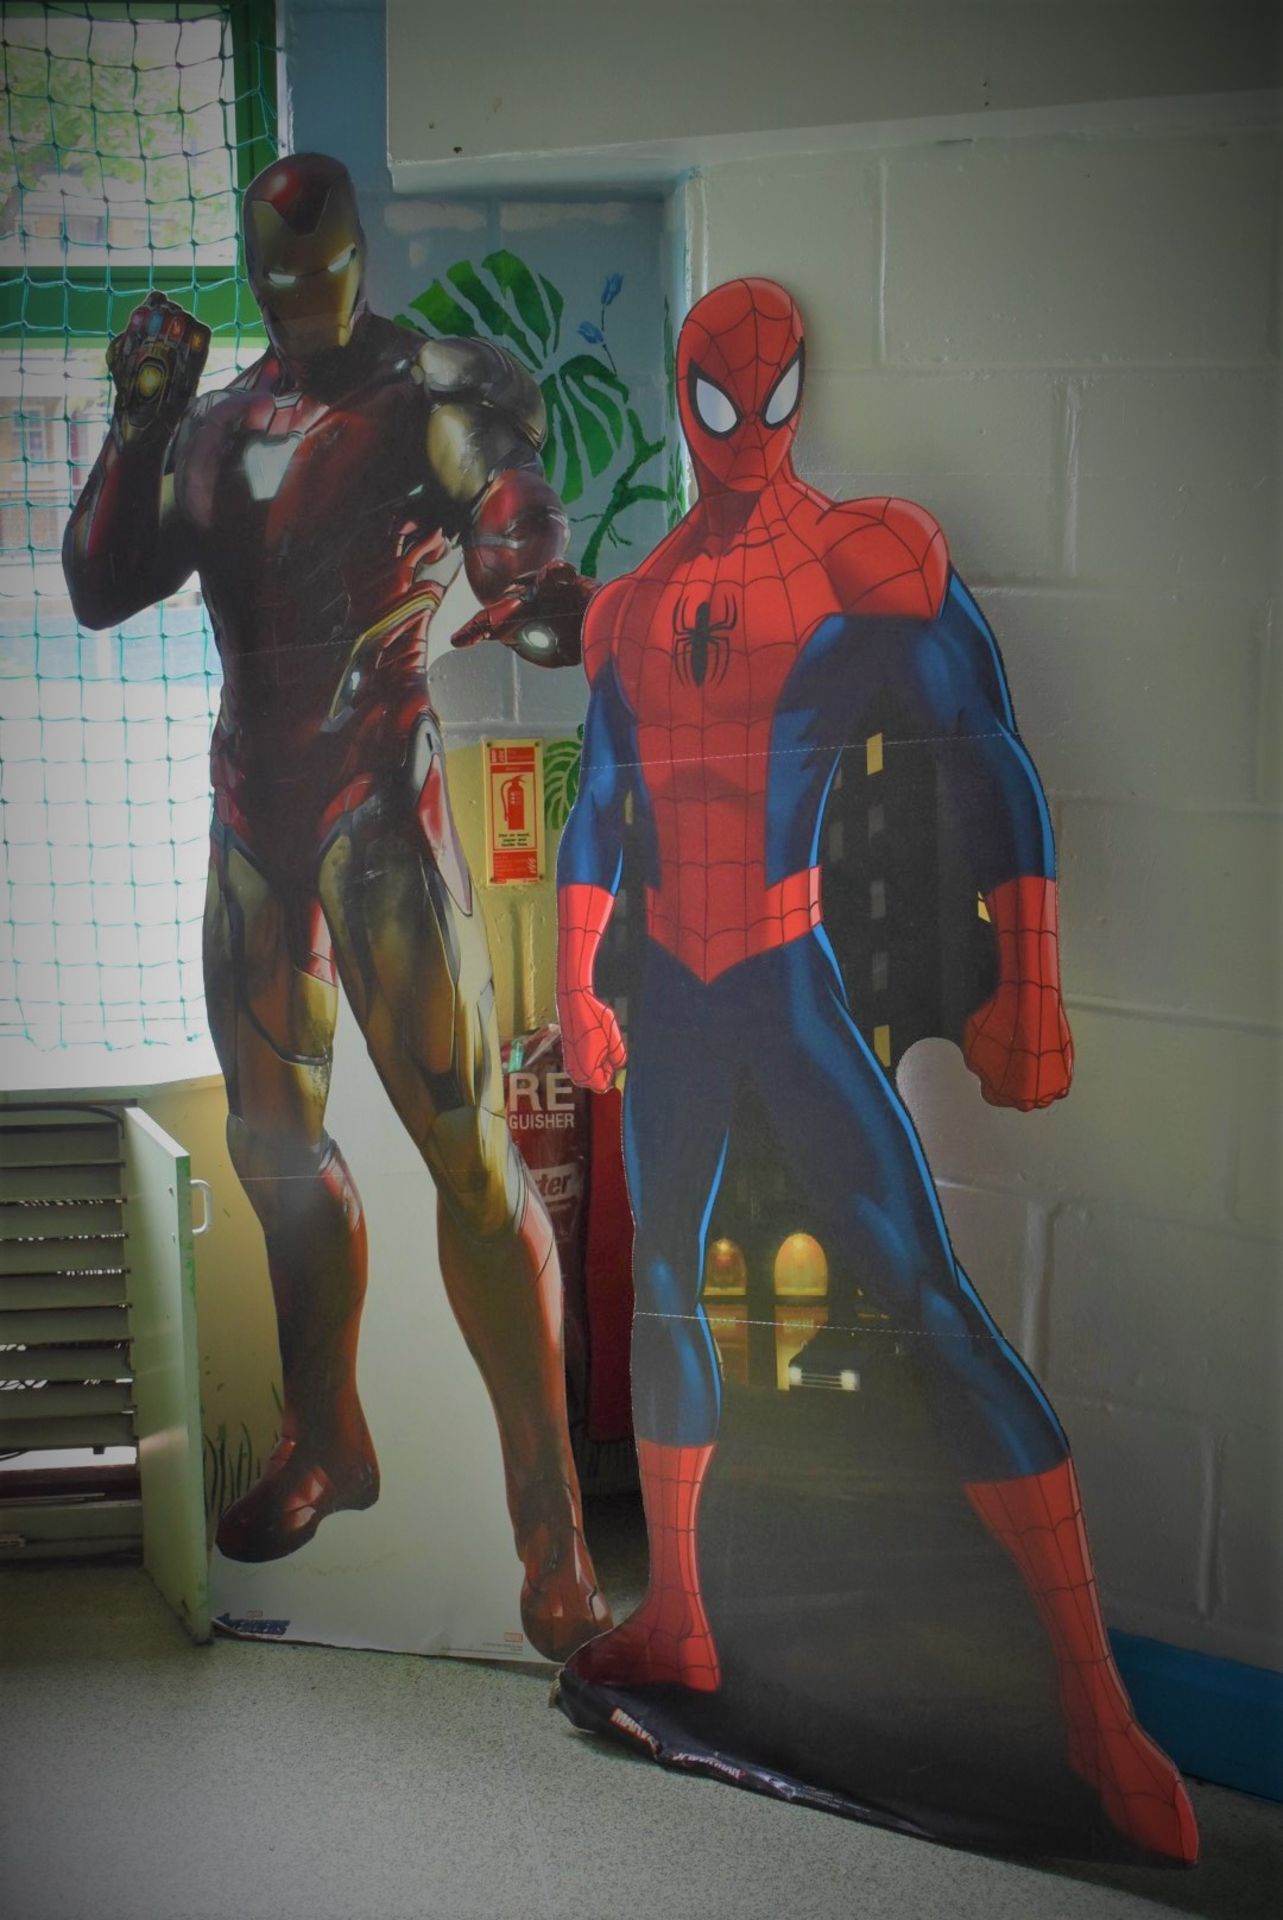 2 x Lifesize Cardboard Superhero Cut-Outs of Spiderman and Iron Man - Approx 6-7ft Tall - Ref U - - Image 2 of 2